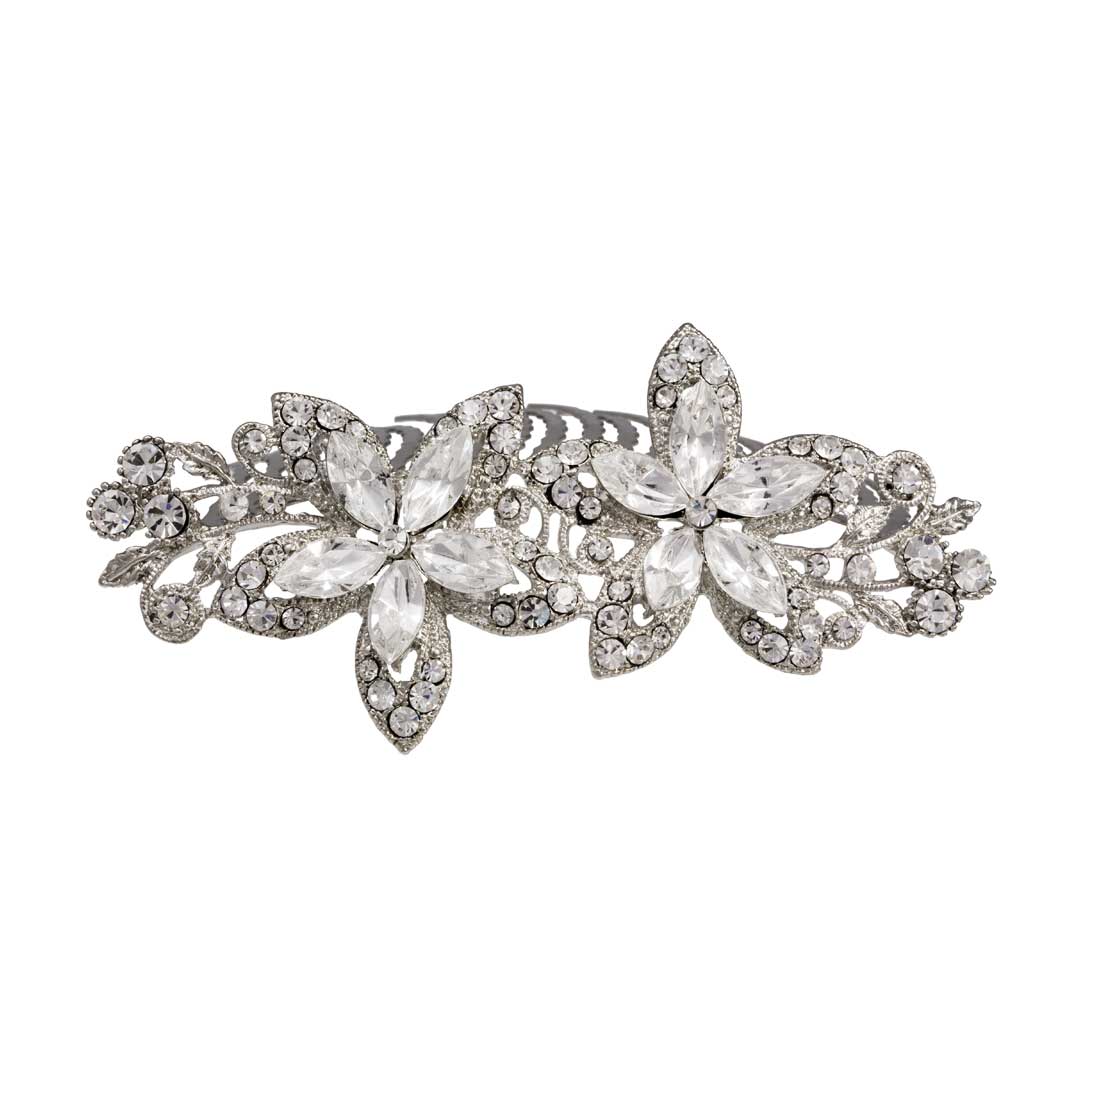 Blooms of Extravagance Statement Crystal Wedding Hair Comb